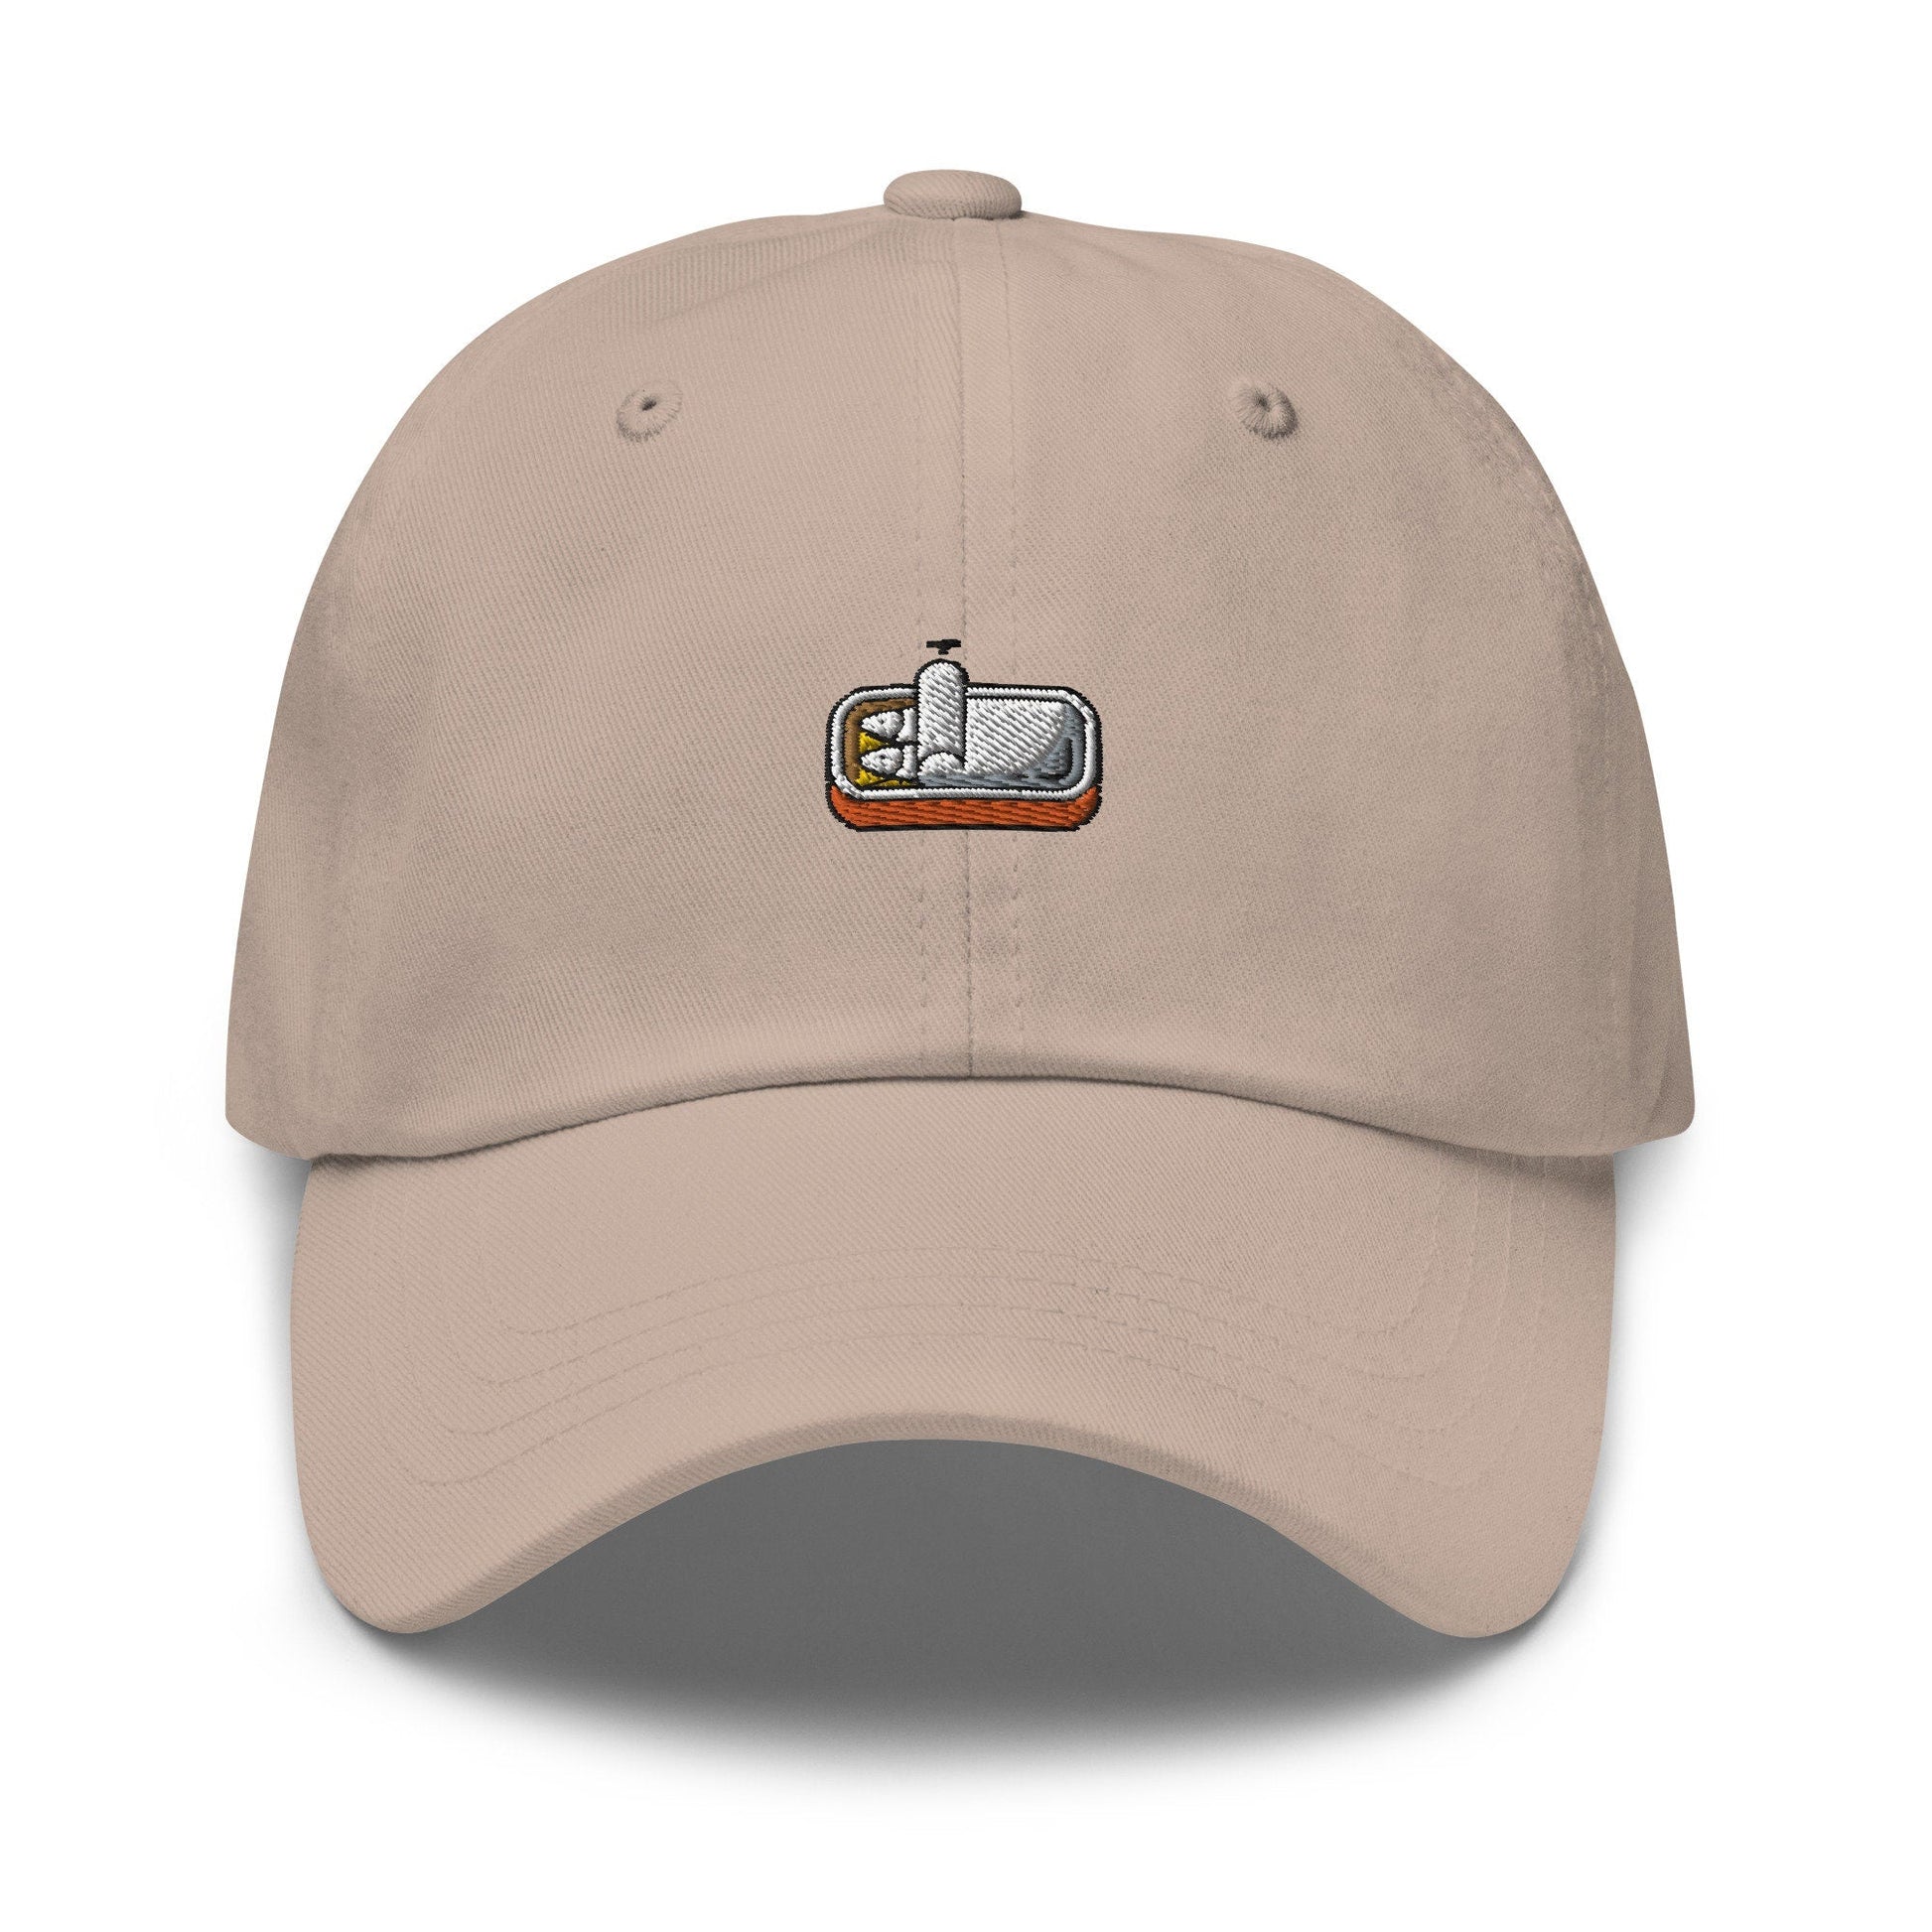 Sardine Dad Hat - Canned Fish Moment - Anchovy Fans - Seafood Lovers - Cotton Embroidered Cap - Multiple Colors - Evilwater Originals